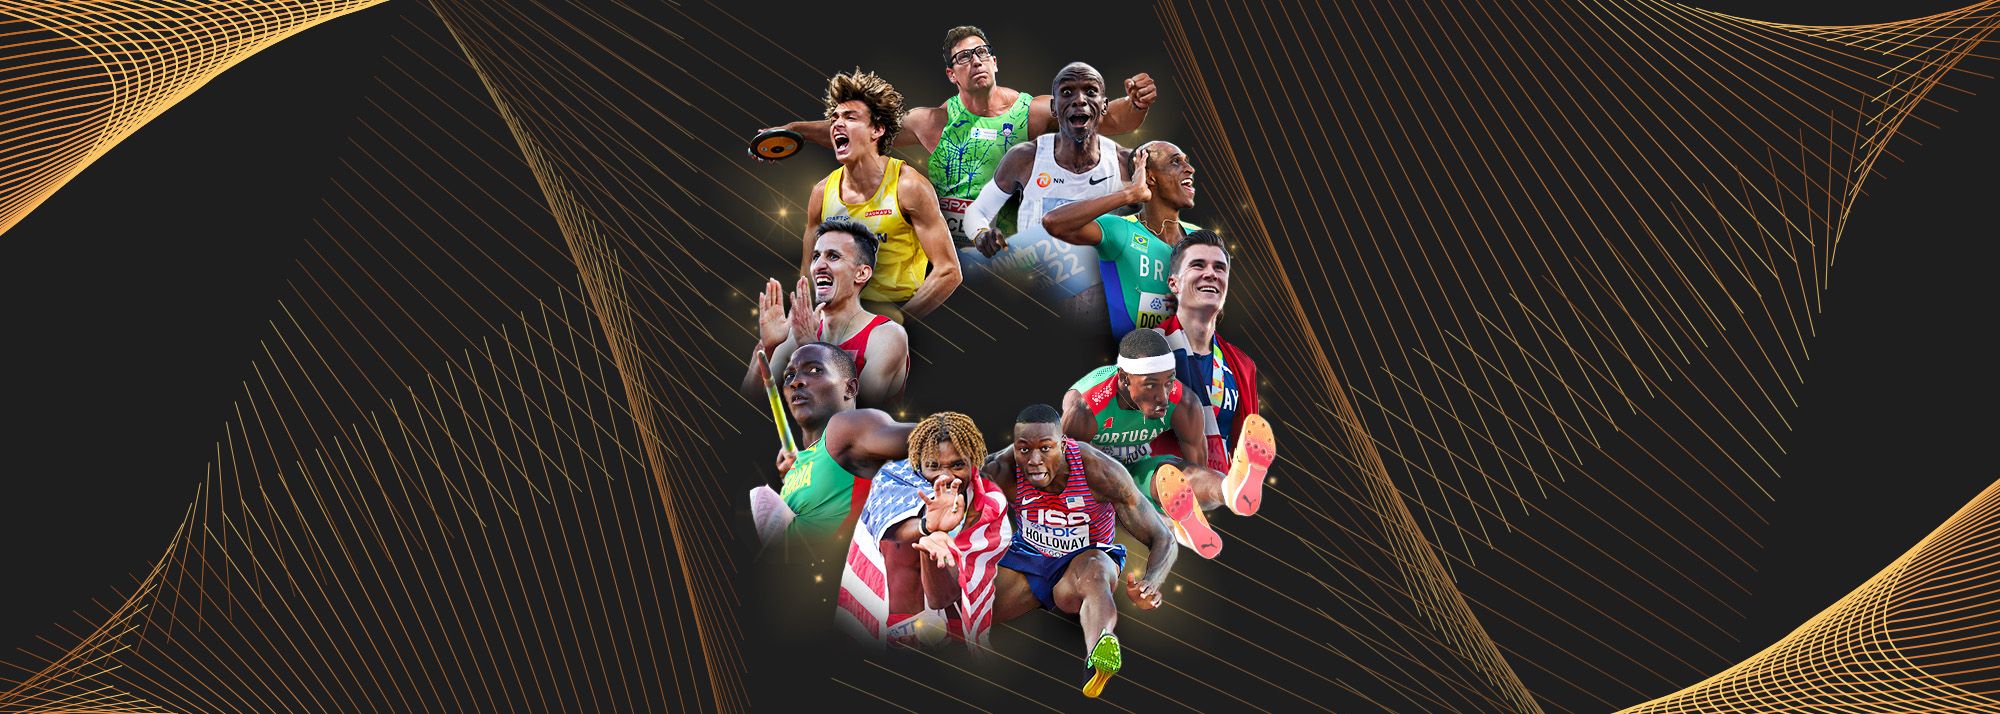 Men's World Athlete of the Year nominees 